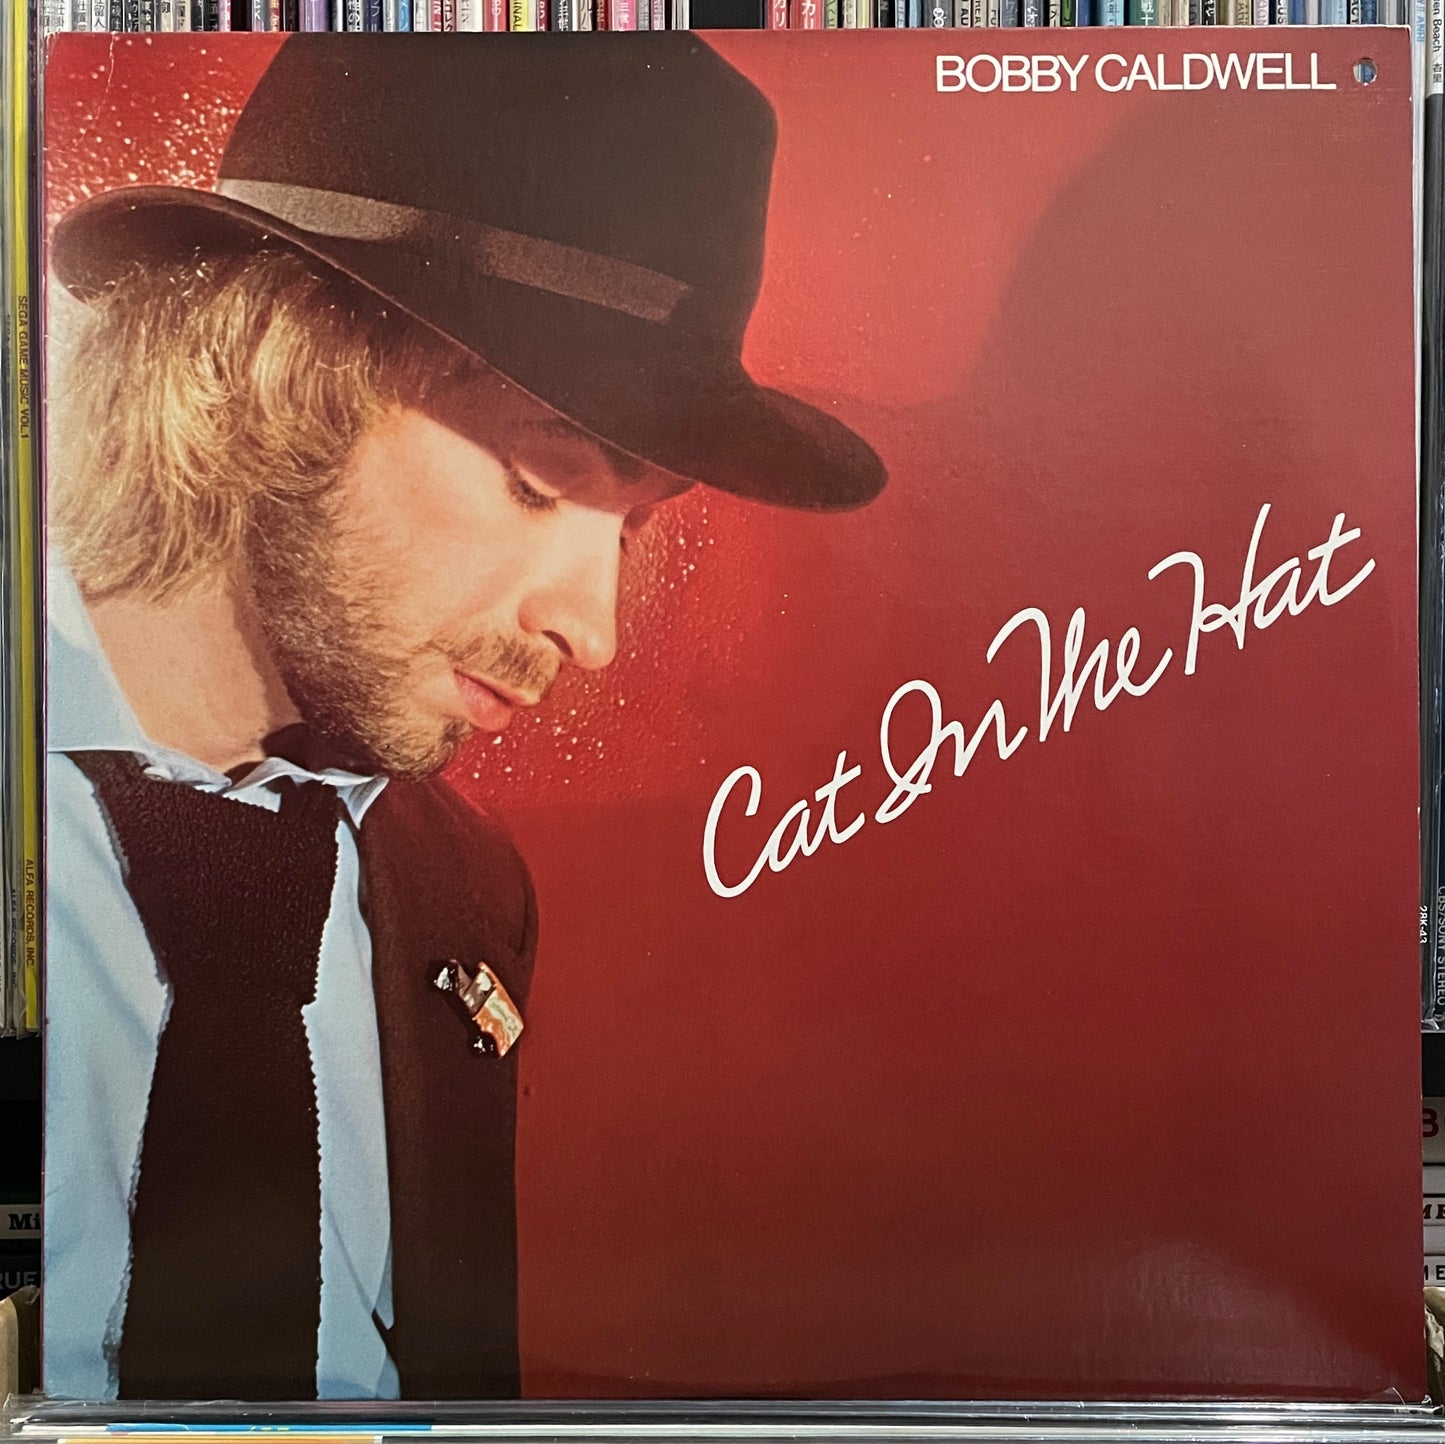 Bobby Caldwell “Cat In The Hat” (1980)